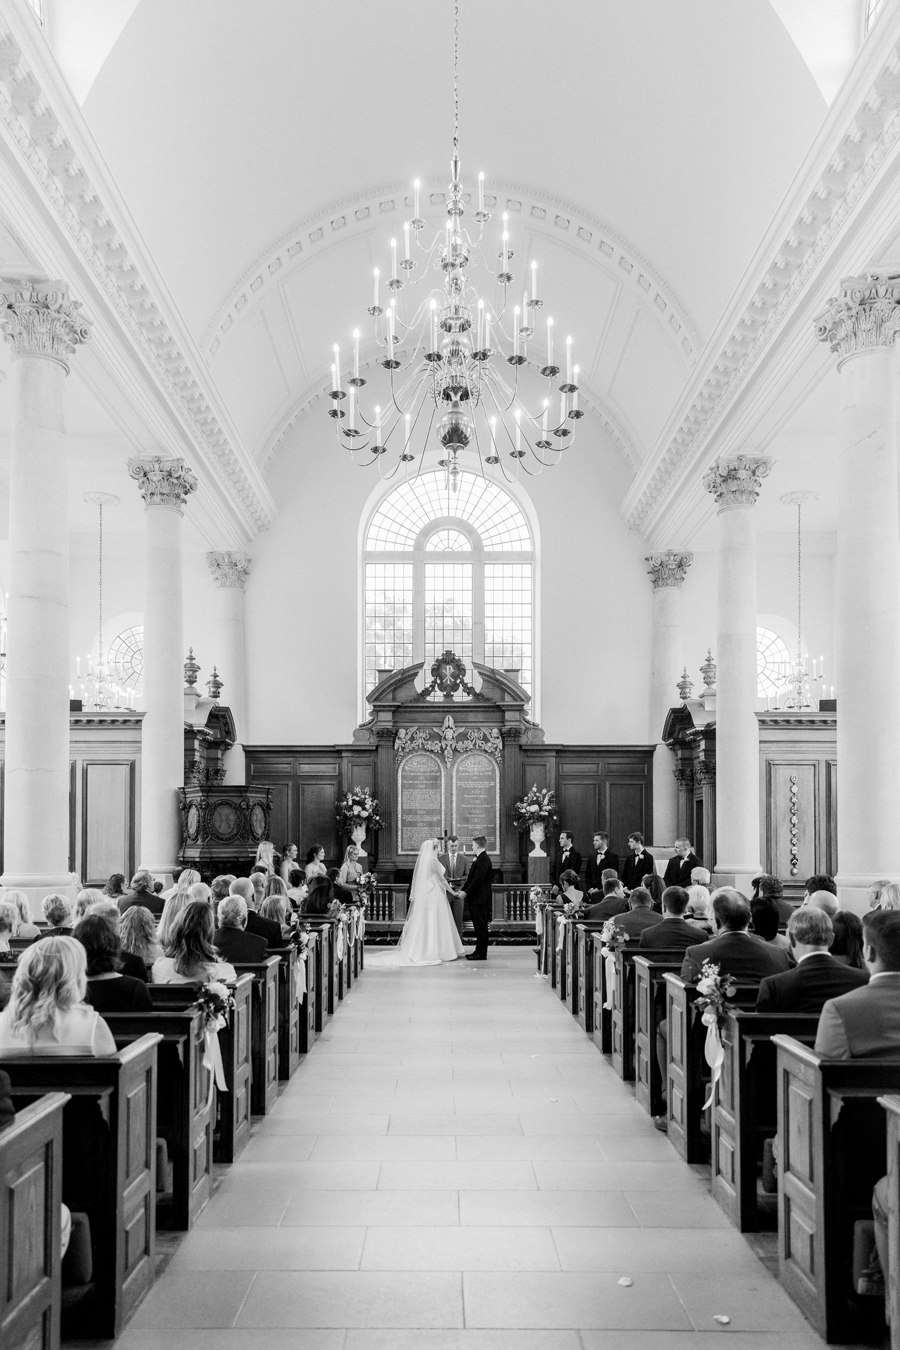 A bride and groom marry at the altar in the Church of St. Mary, Aldermanbury at a Westminster College wedding by Love Tree Studios.